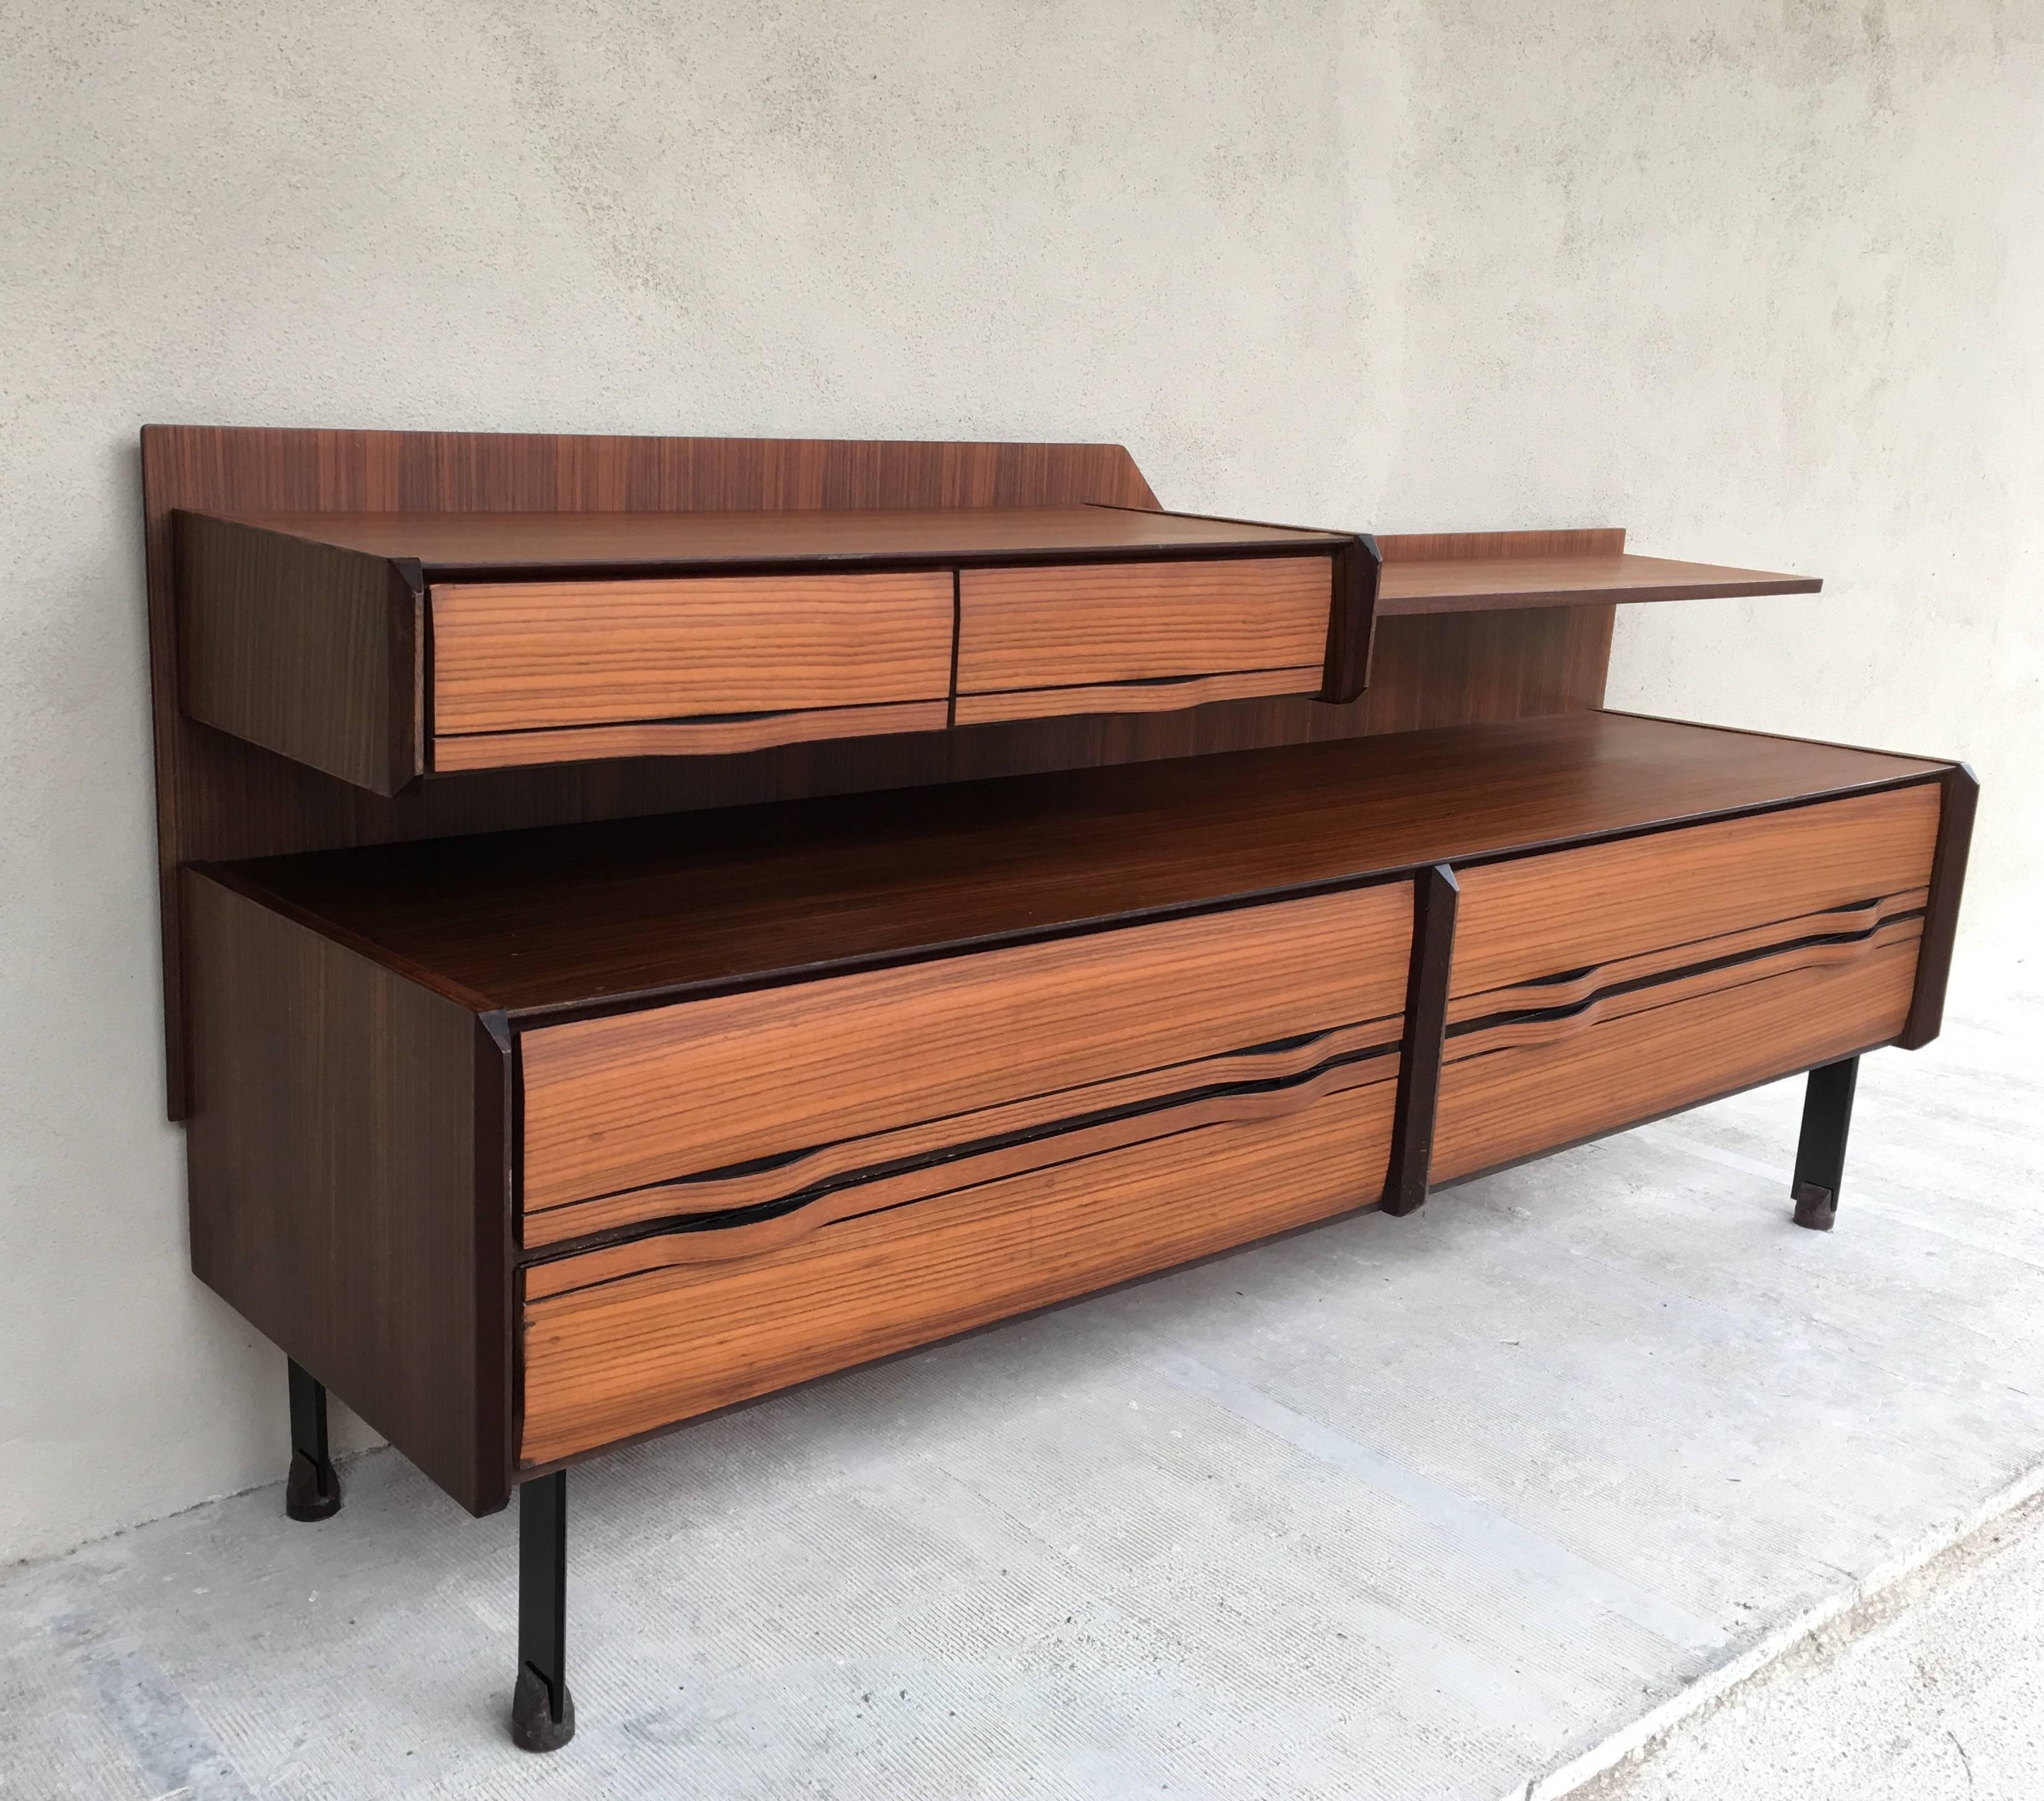 A wonderfully crafted sideboard from teak with an upper tier with two drawers and shelf and four larger drawers on the lower tier. Black lacquered steel legs. The bentwood handles that are an integral part of the drawers are a beautiful detail. Good